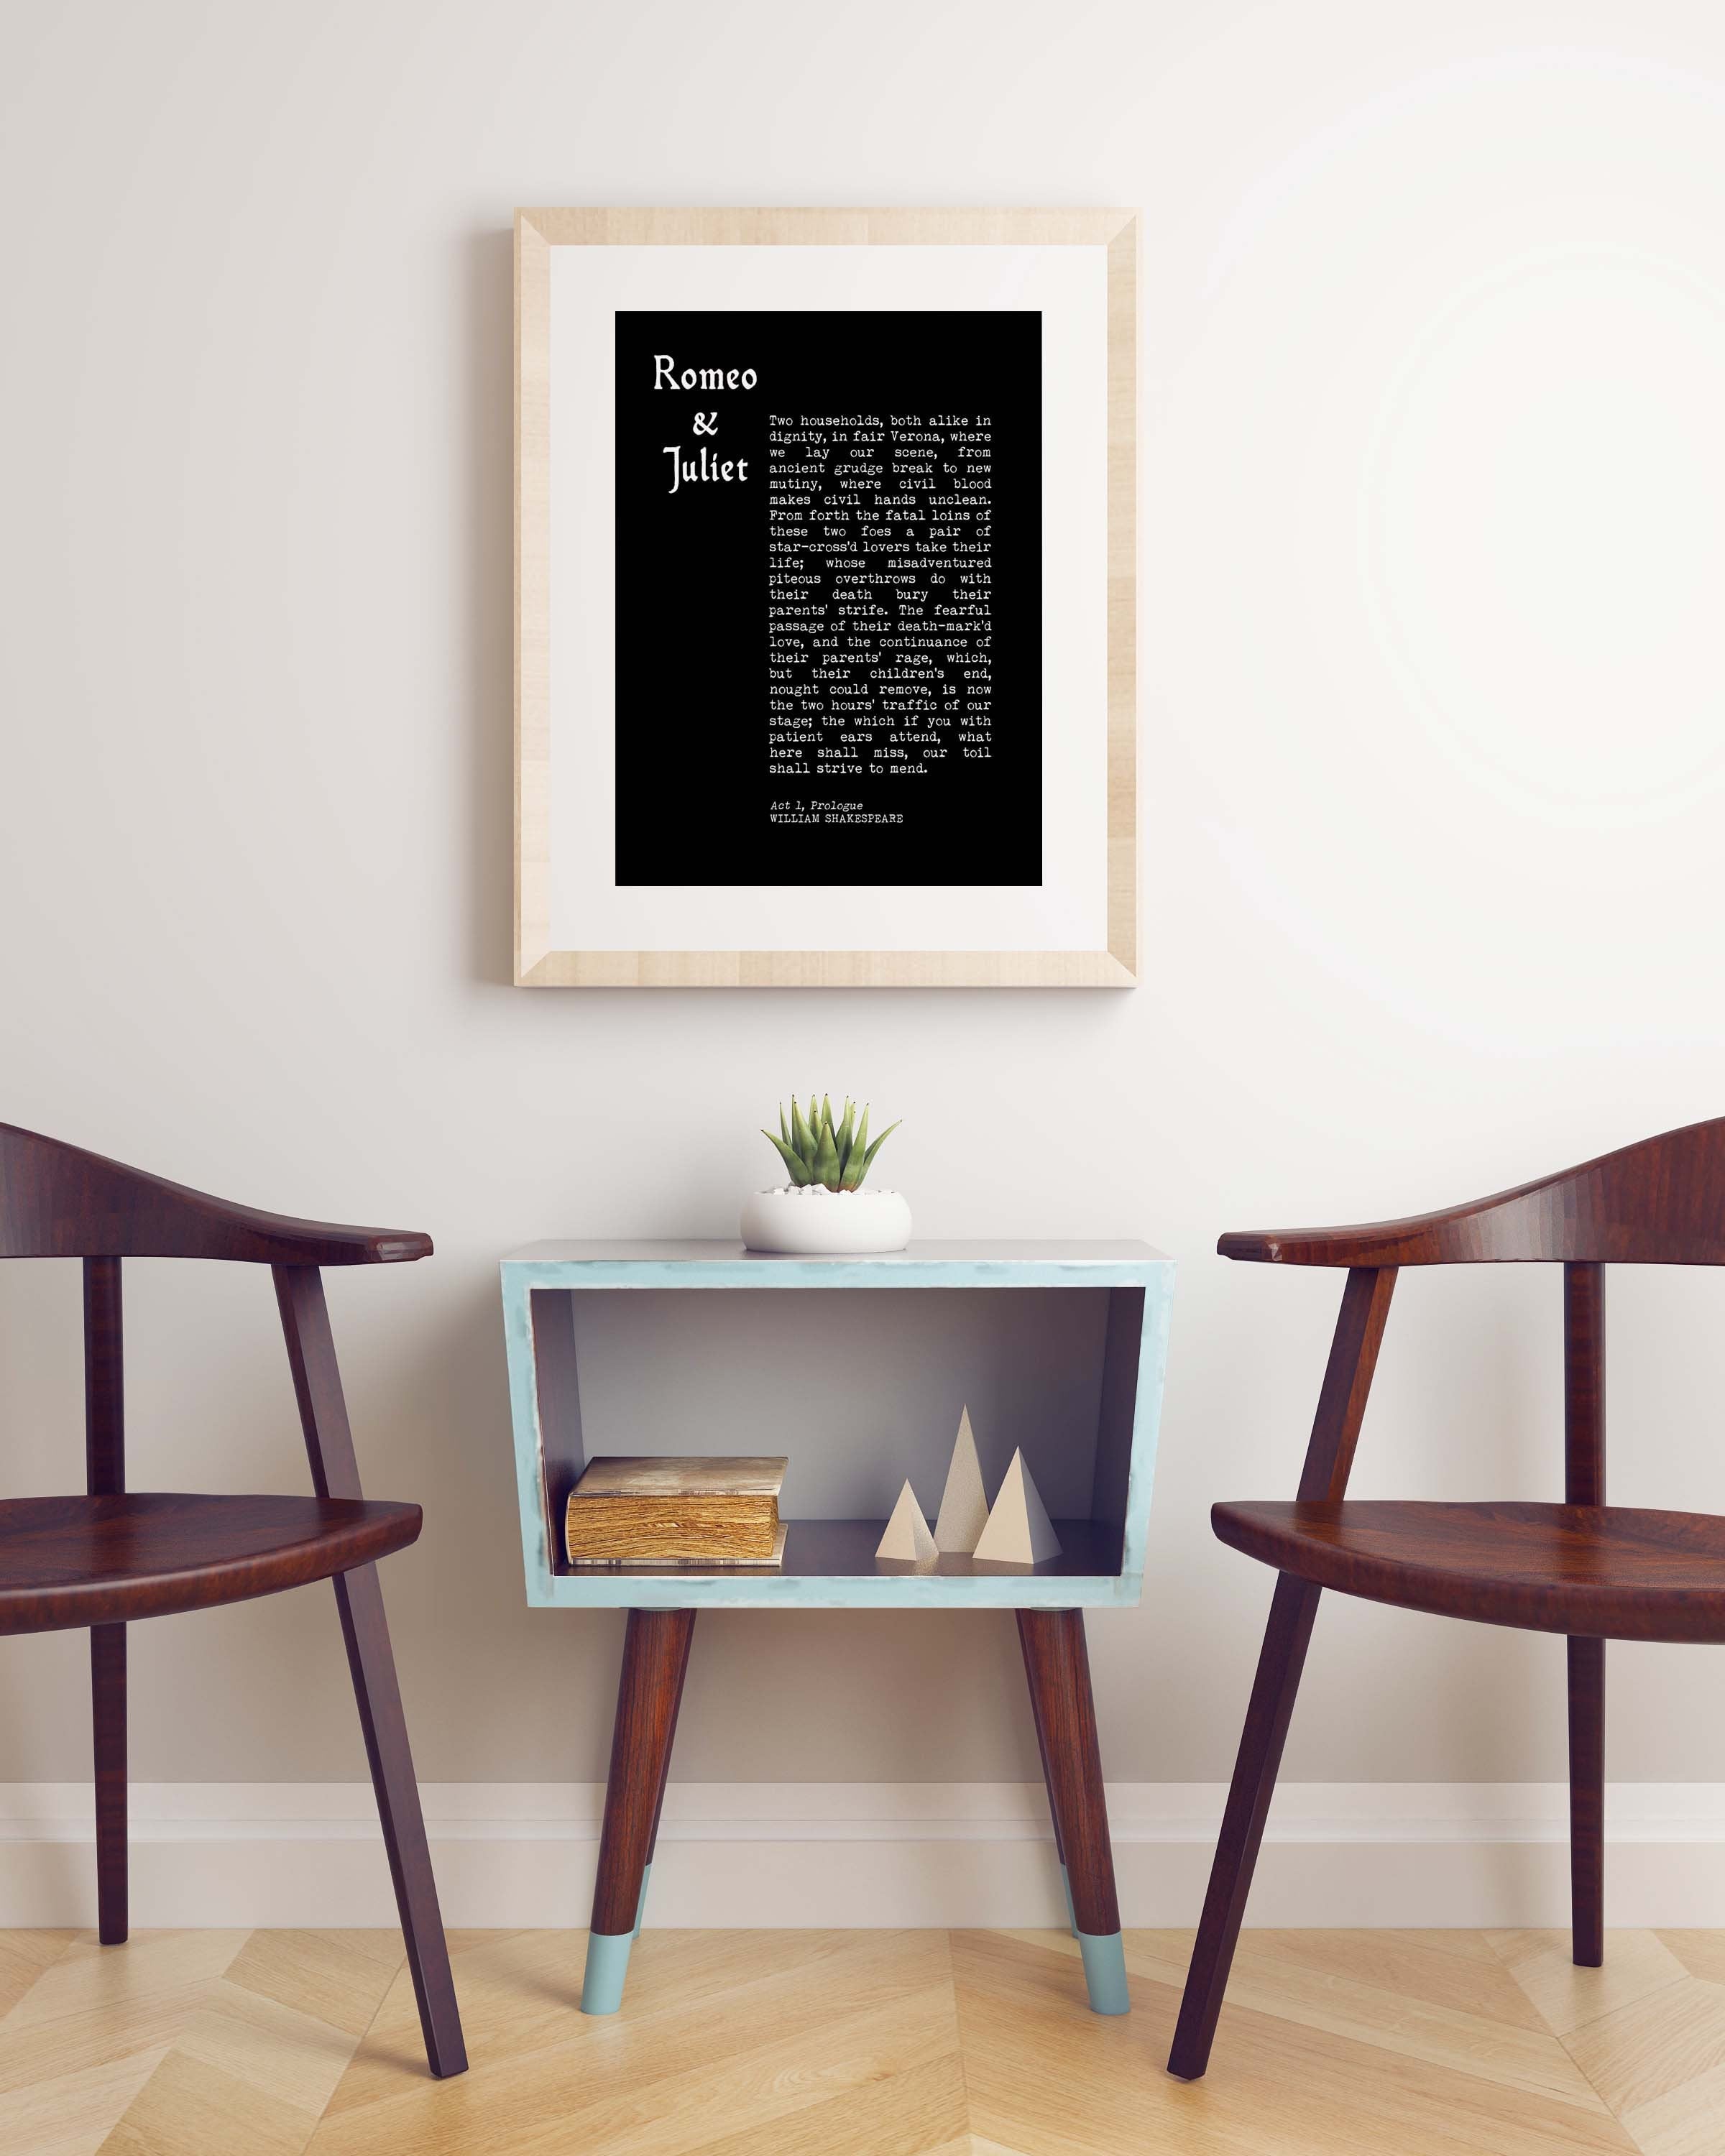 Two Households, Both Alike In Dignity - Romeo & Juliet Prologue William Shakespeare Black And White Wall Art Prints